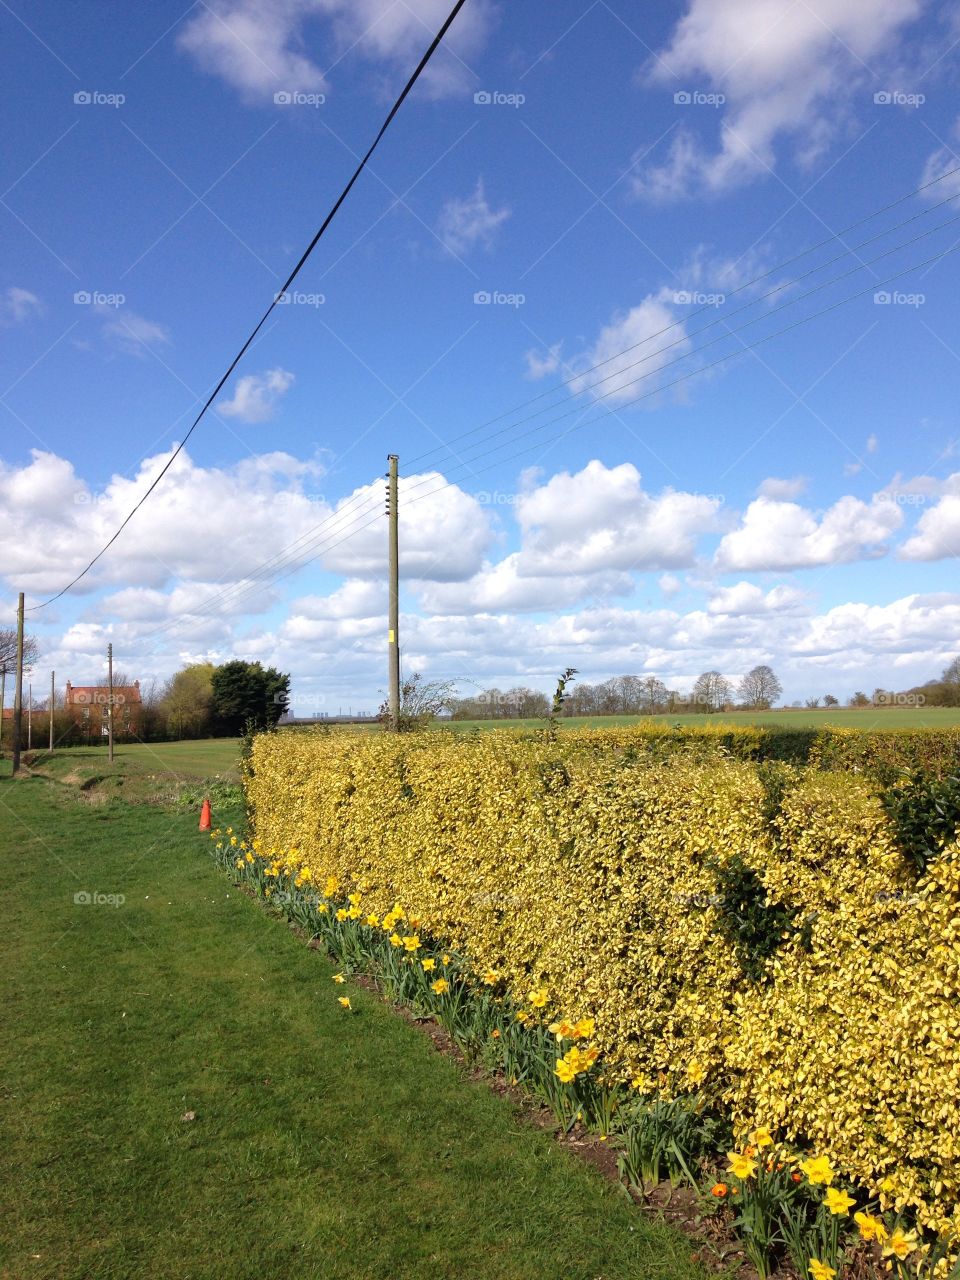 Yellow leaves hedge with daffodil flowers and farm fields in the Lincolnshire countryside on a sunny cloudy day